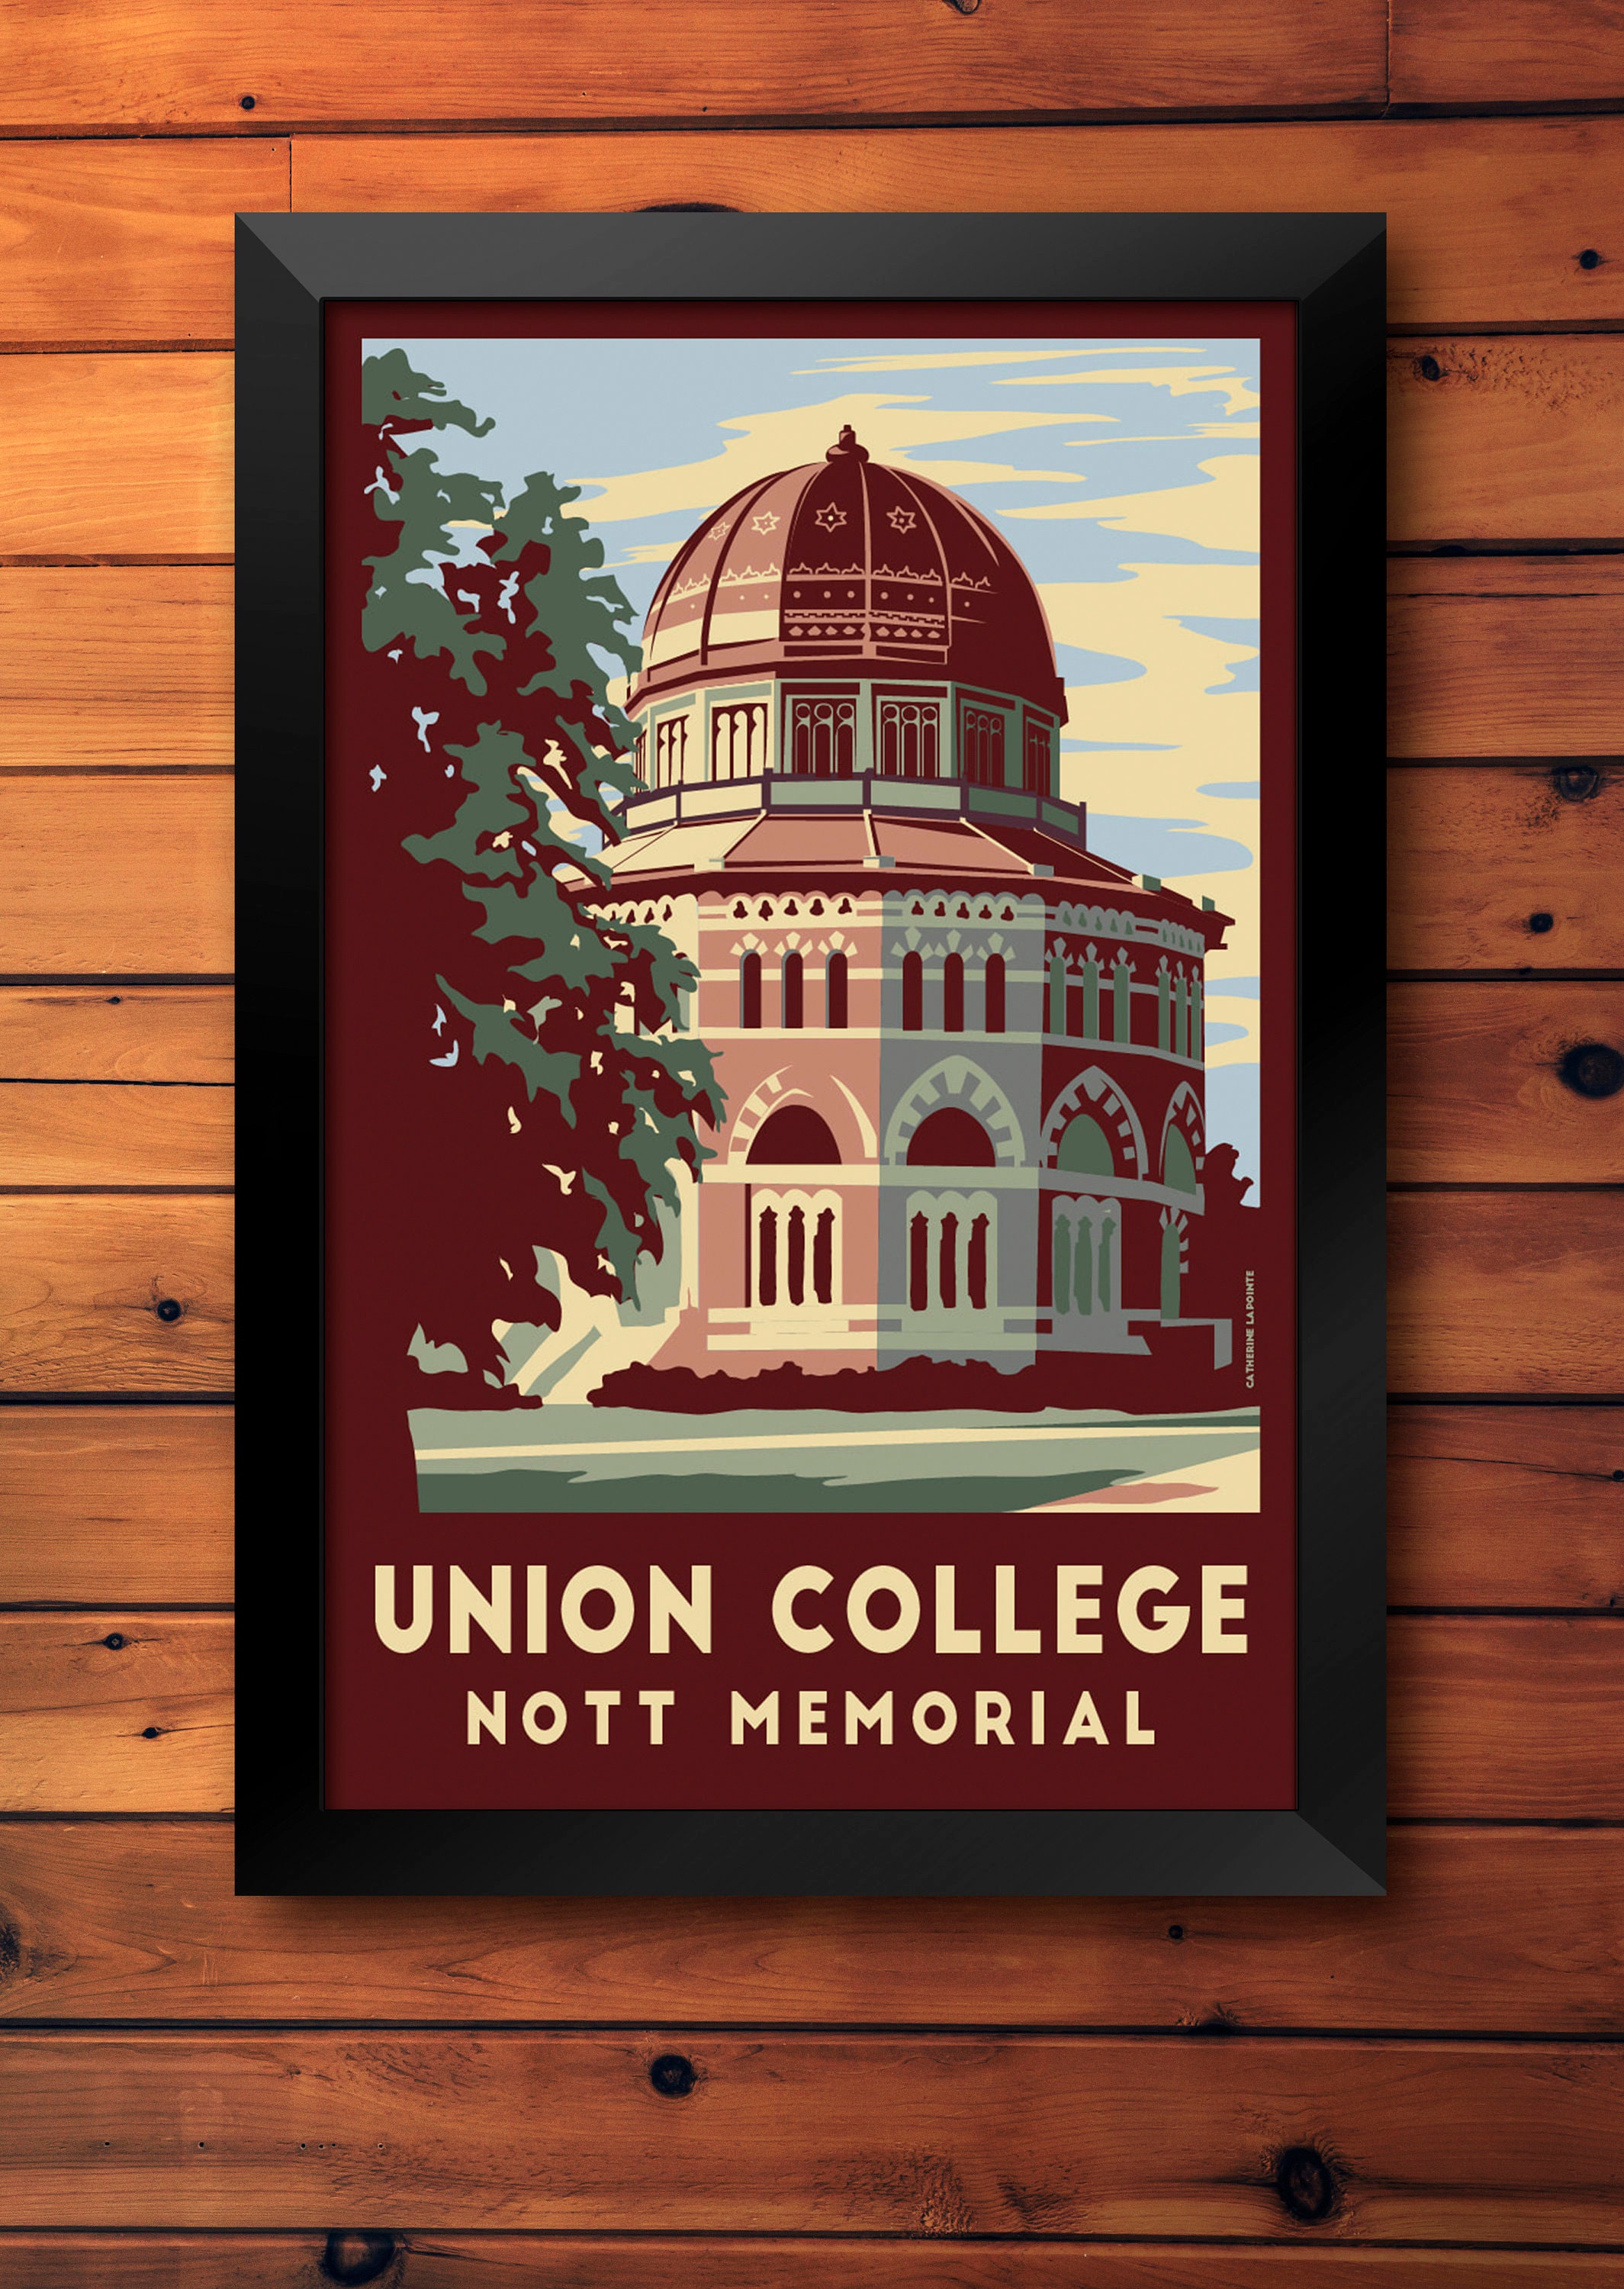 Union College Schenectady NY Vintage Travel Poster Nott pic